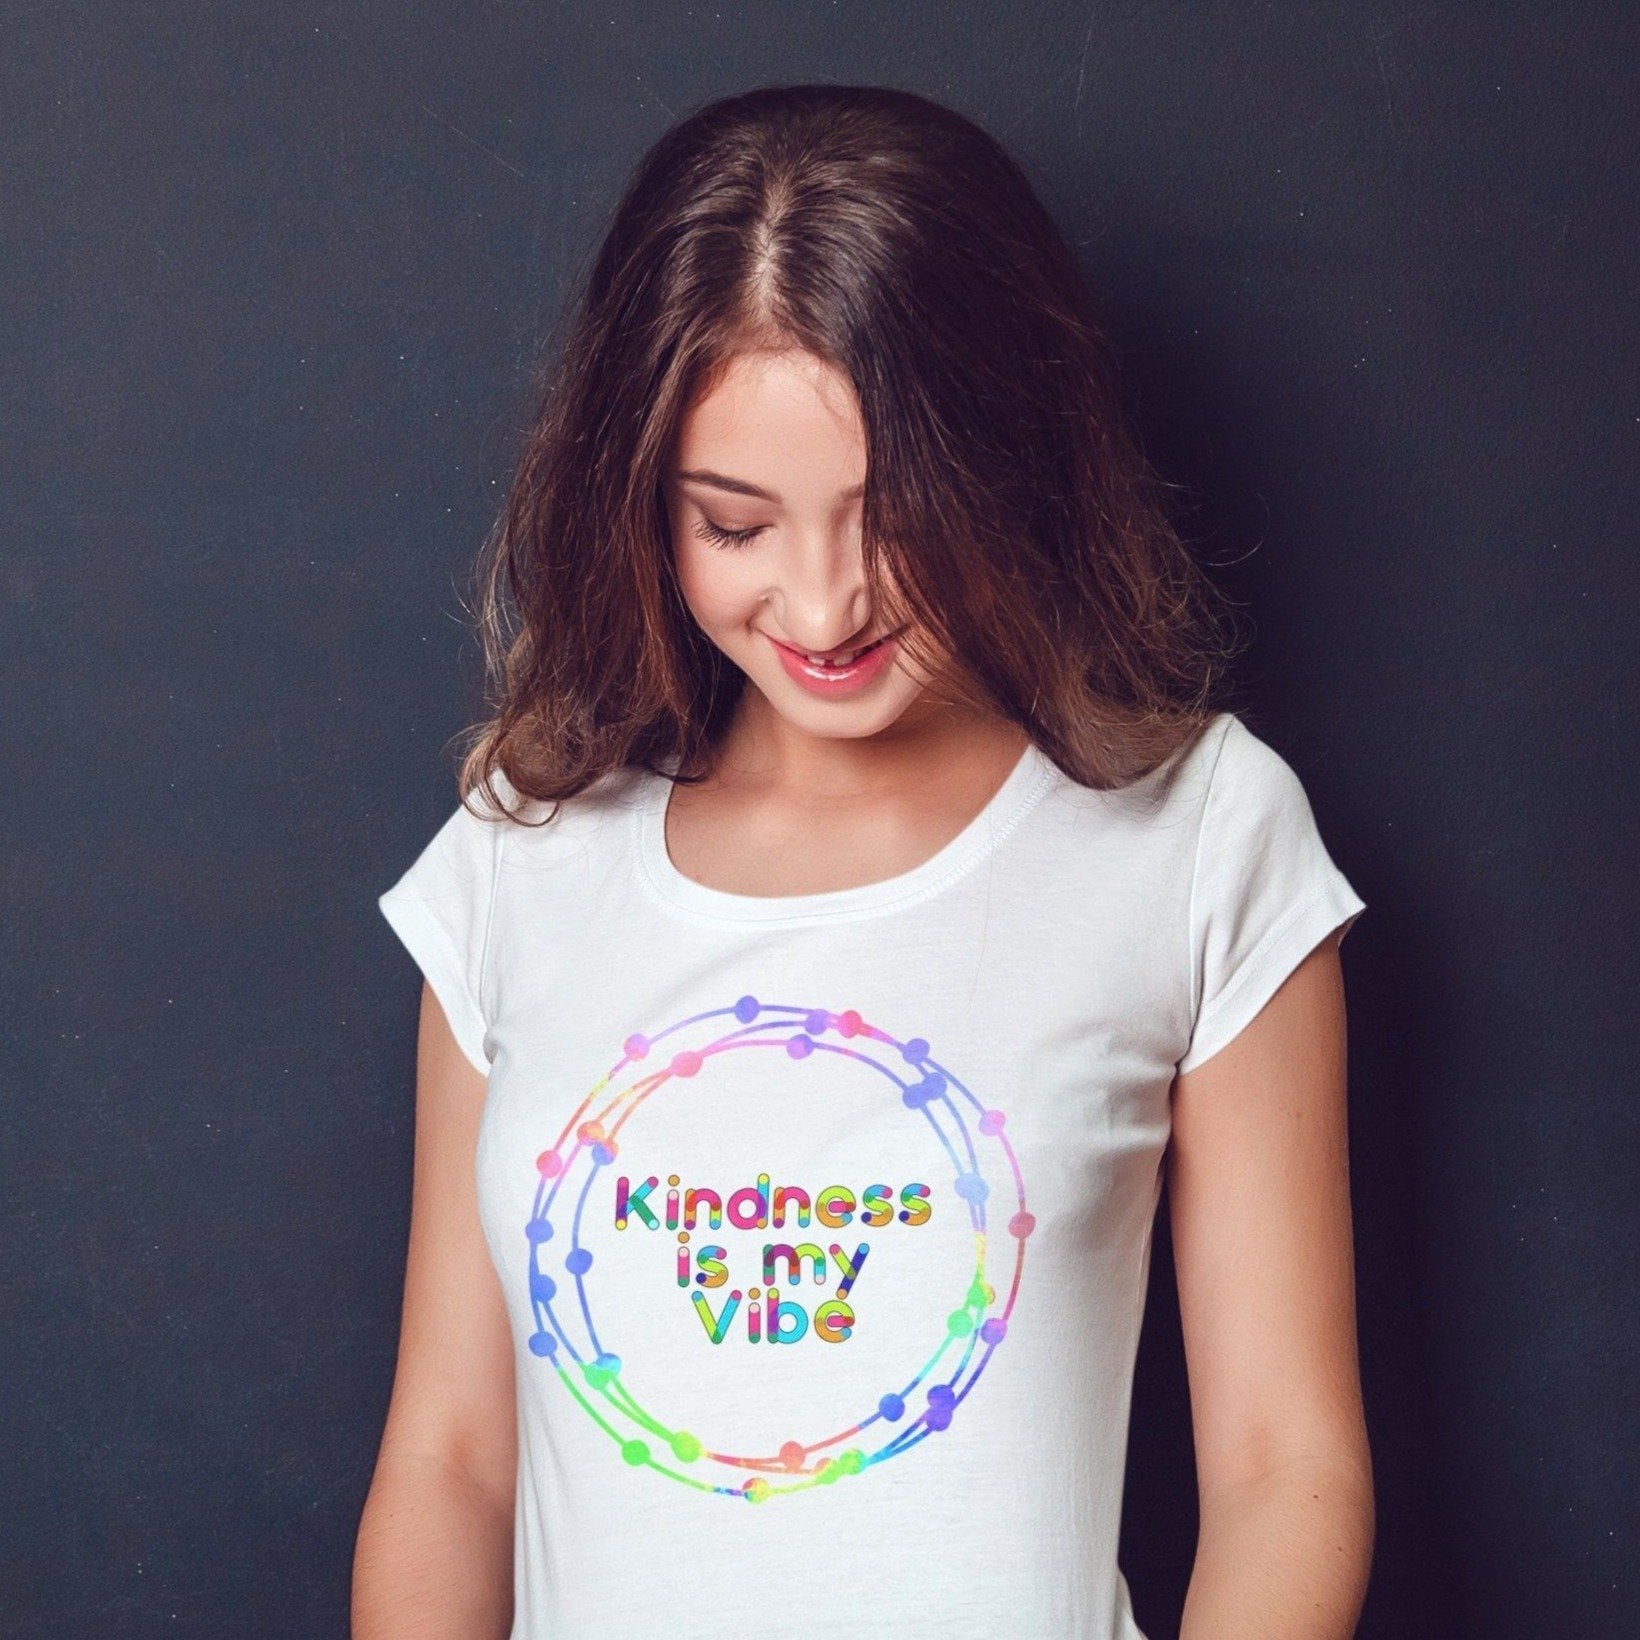 Kindness Is My Vibe 2 Graphic Tee - My Custom Tee Party